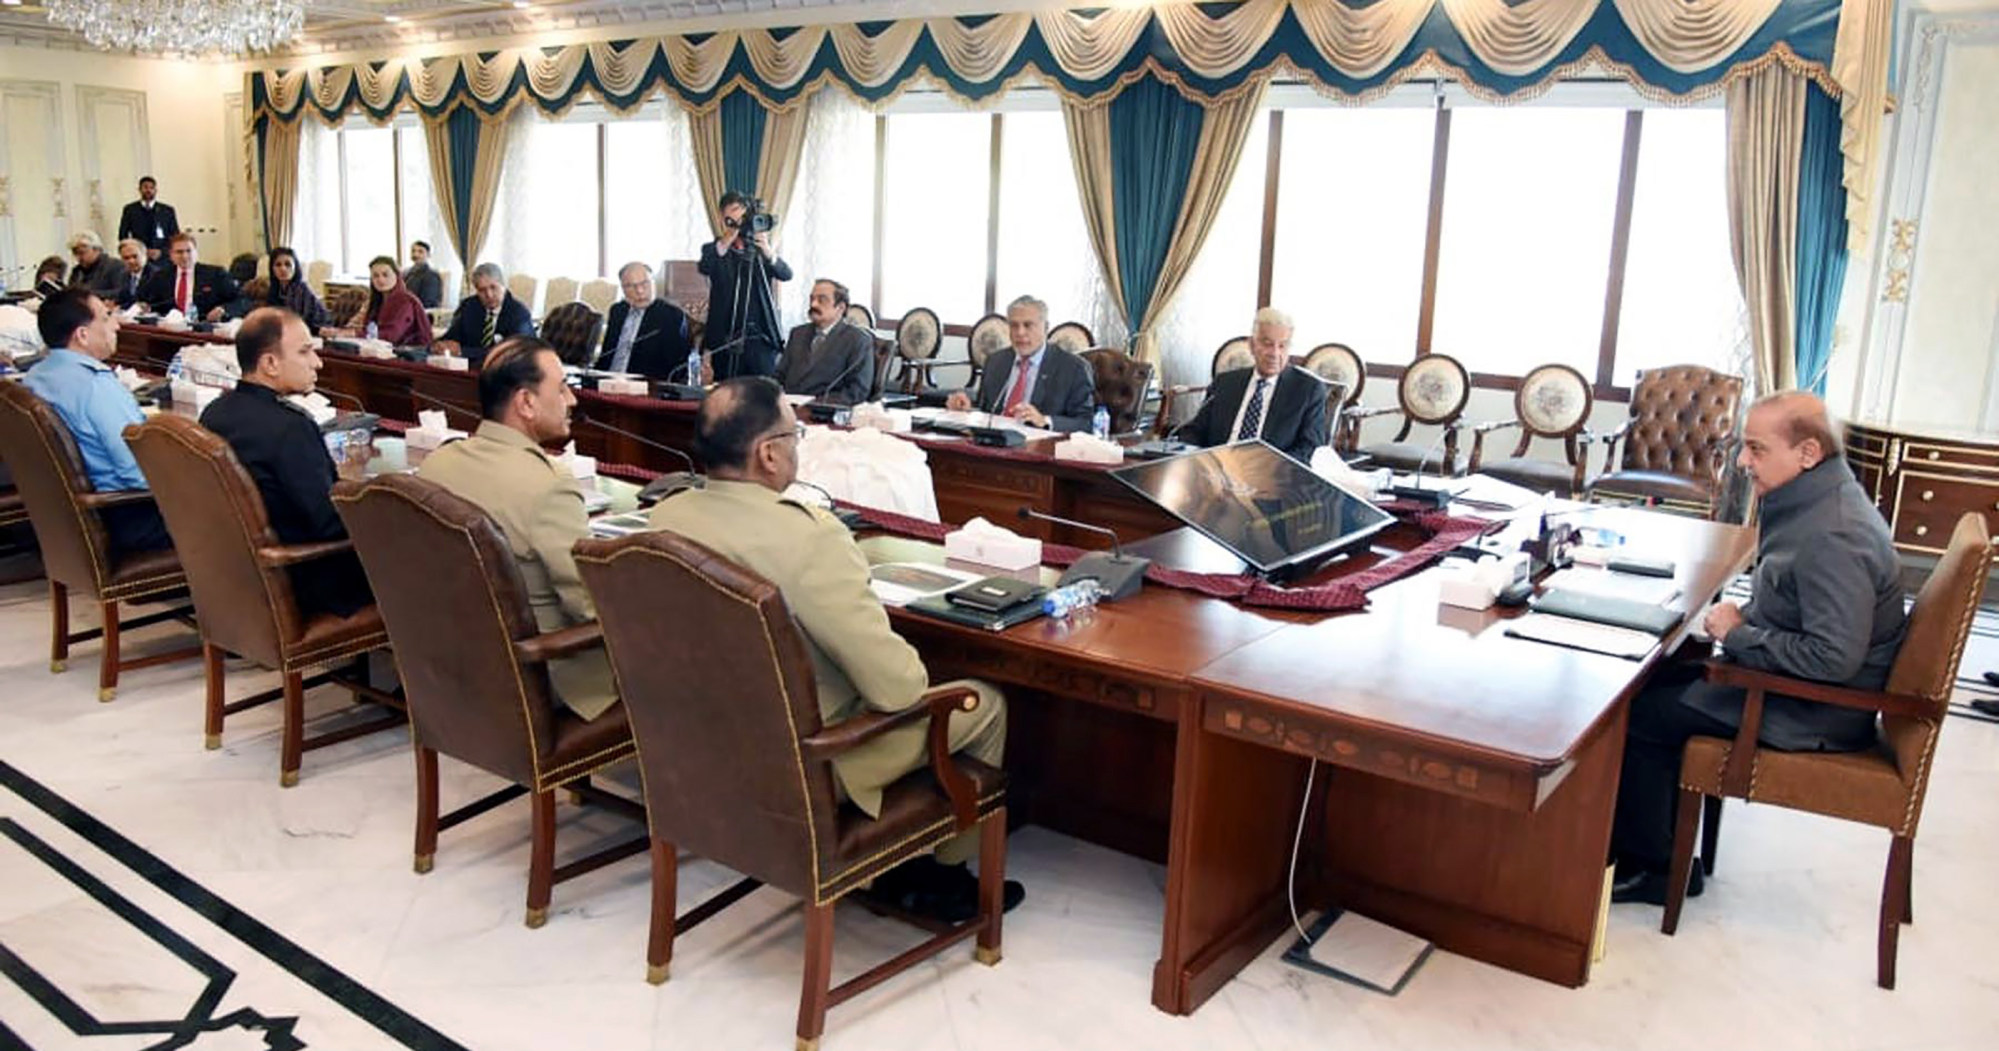 Pakistan’s PM Shahbaz Sharif (right) chairs a meeting of the National Security Committee, on January 2. Photo: AP